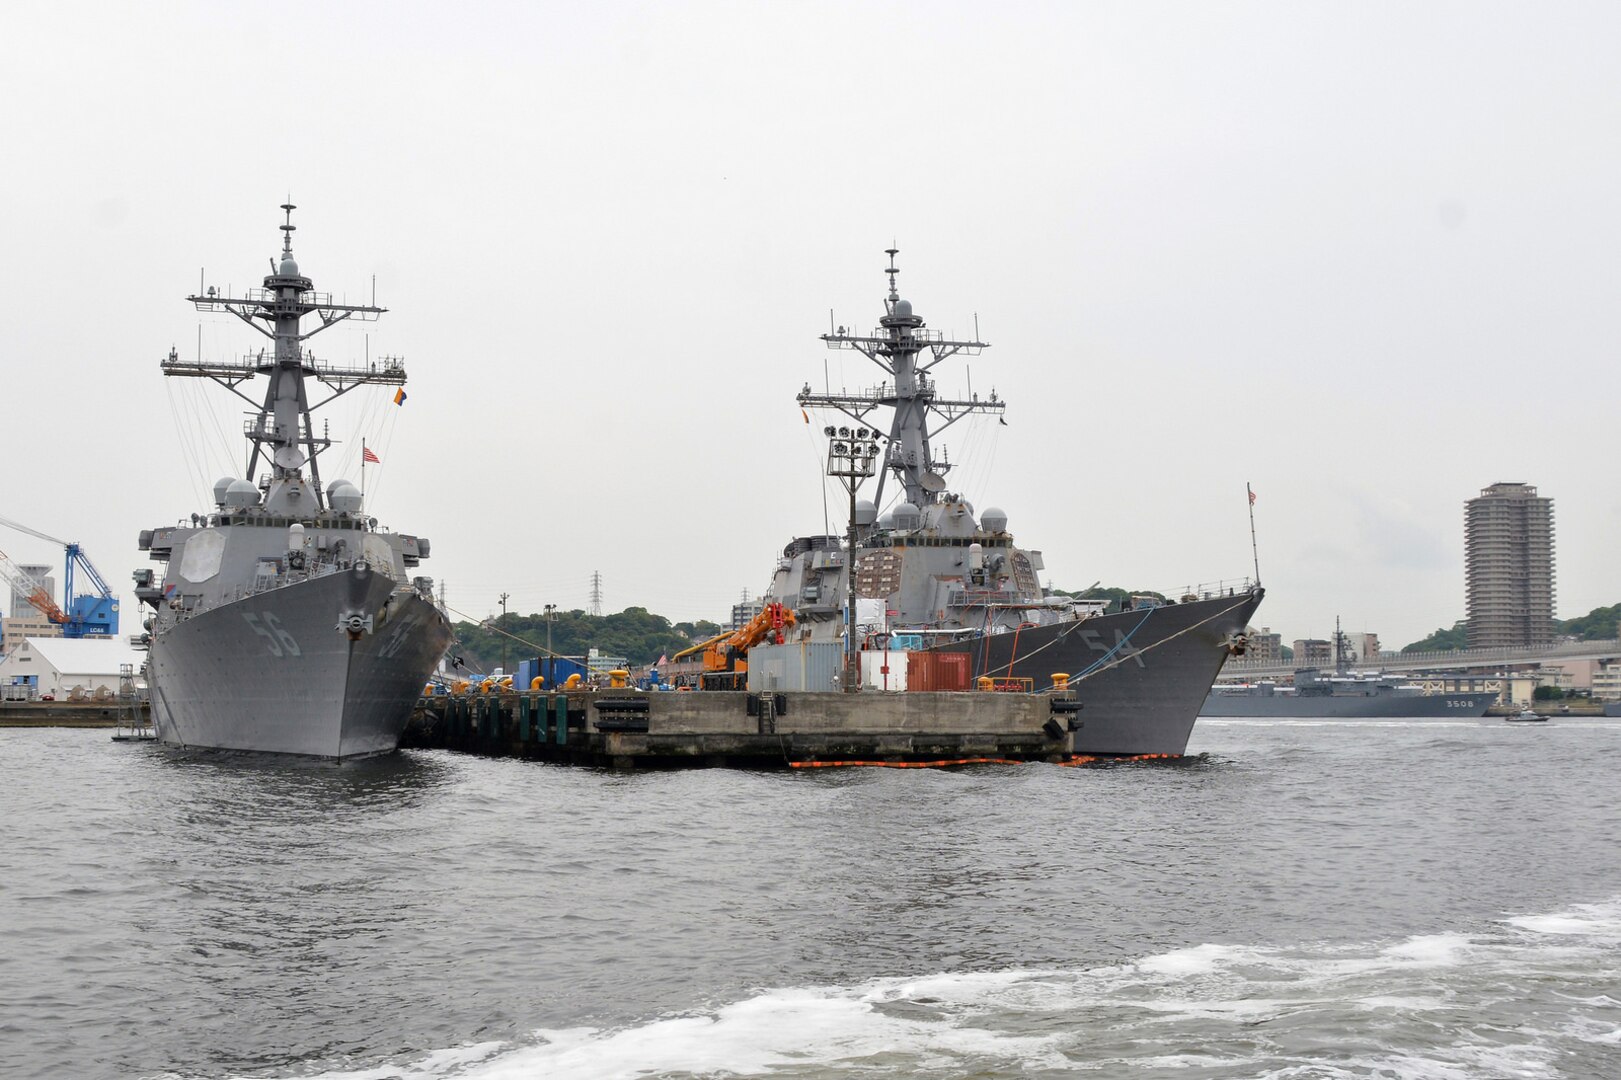 The Arleigh-Burke-class guided-missile destroyers USS John S. McCain (DDG 56) and USS Curtis Wilbur (DDG 54) sit pier-side at Fleet Activities (FLEACT) Yokosuka, May 16, 2017. FLEACT Yokosuka provides, maintains, and operates base facilities and services in support of 7th Fleet's forward-deployed naval forces, 71 tenant commands, and 26,000 military and civilian personnel. 